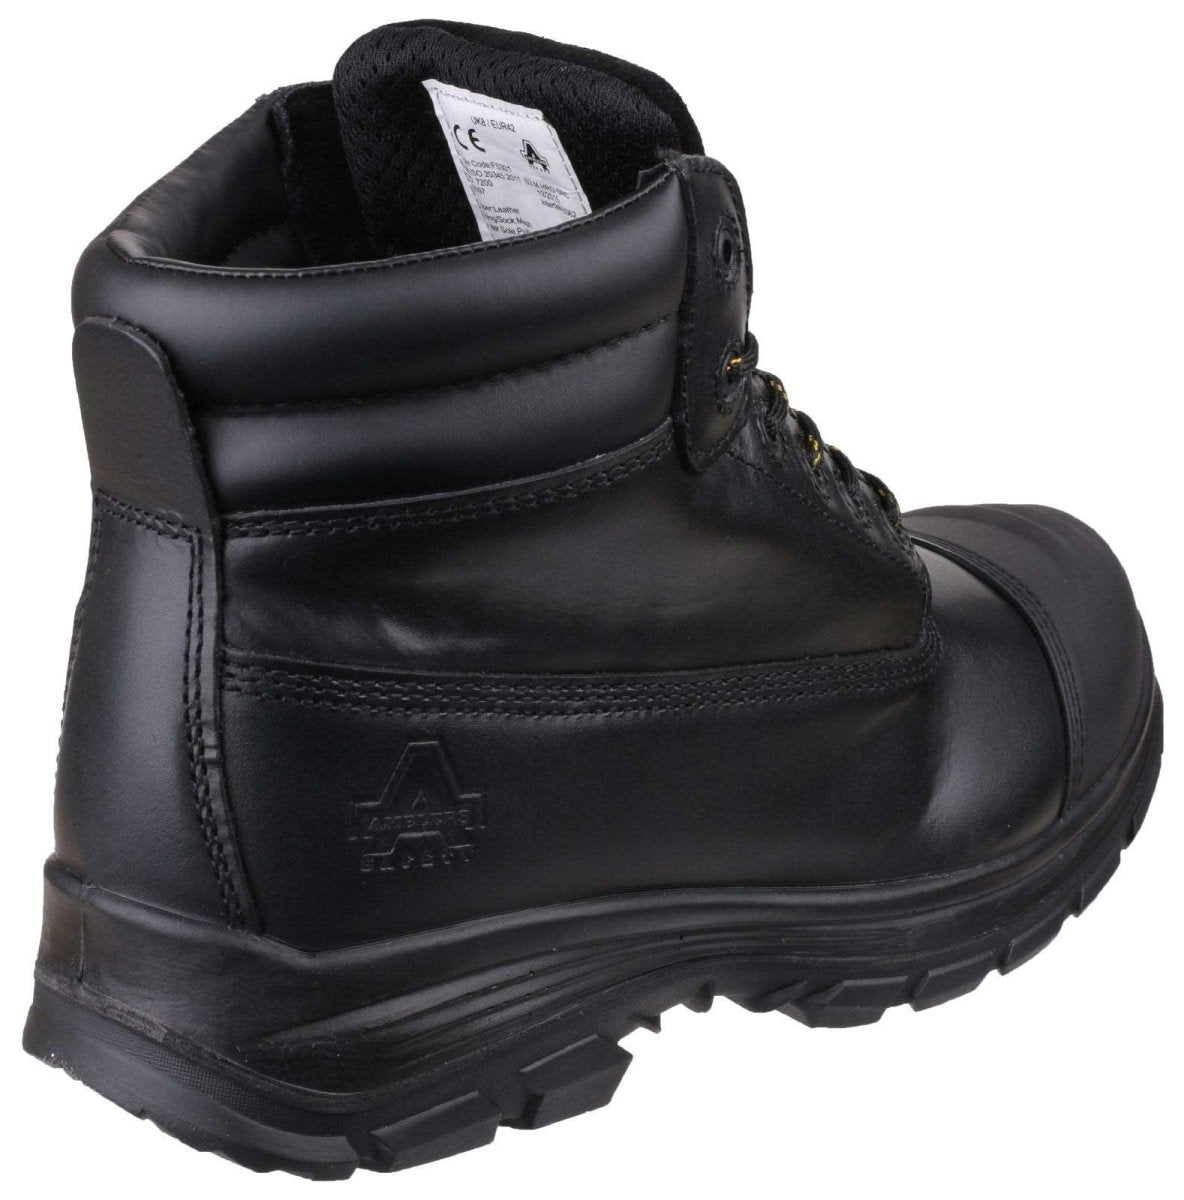 Amblers FS301 Brecon Metatarsal Safety Boots - Shoe Store Direct